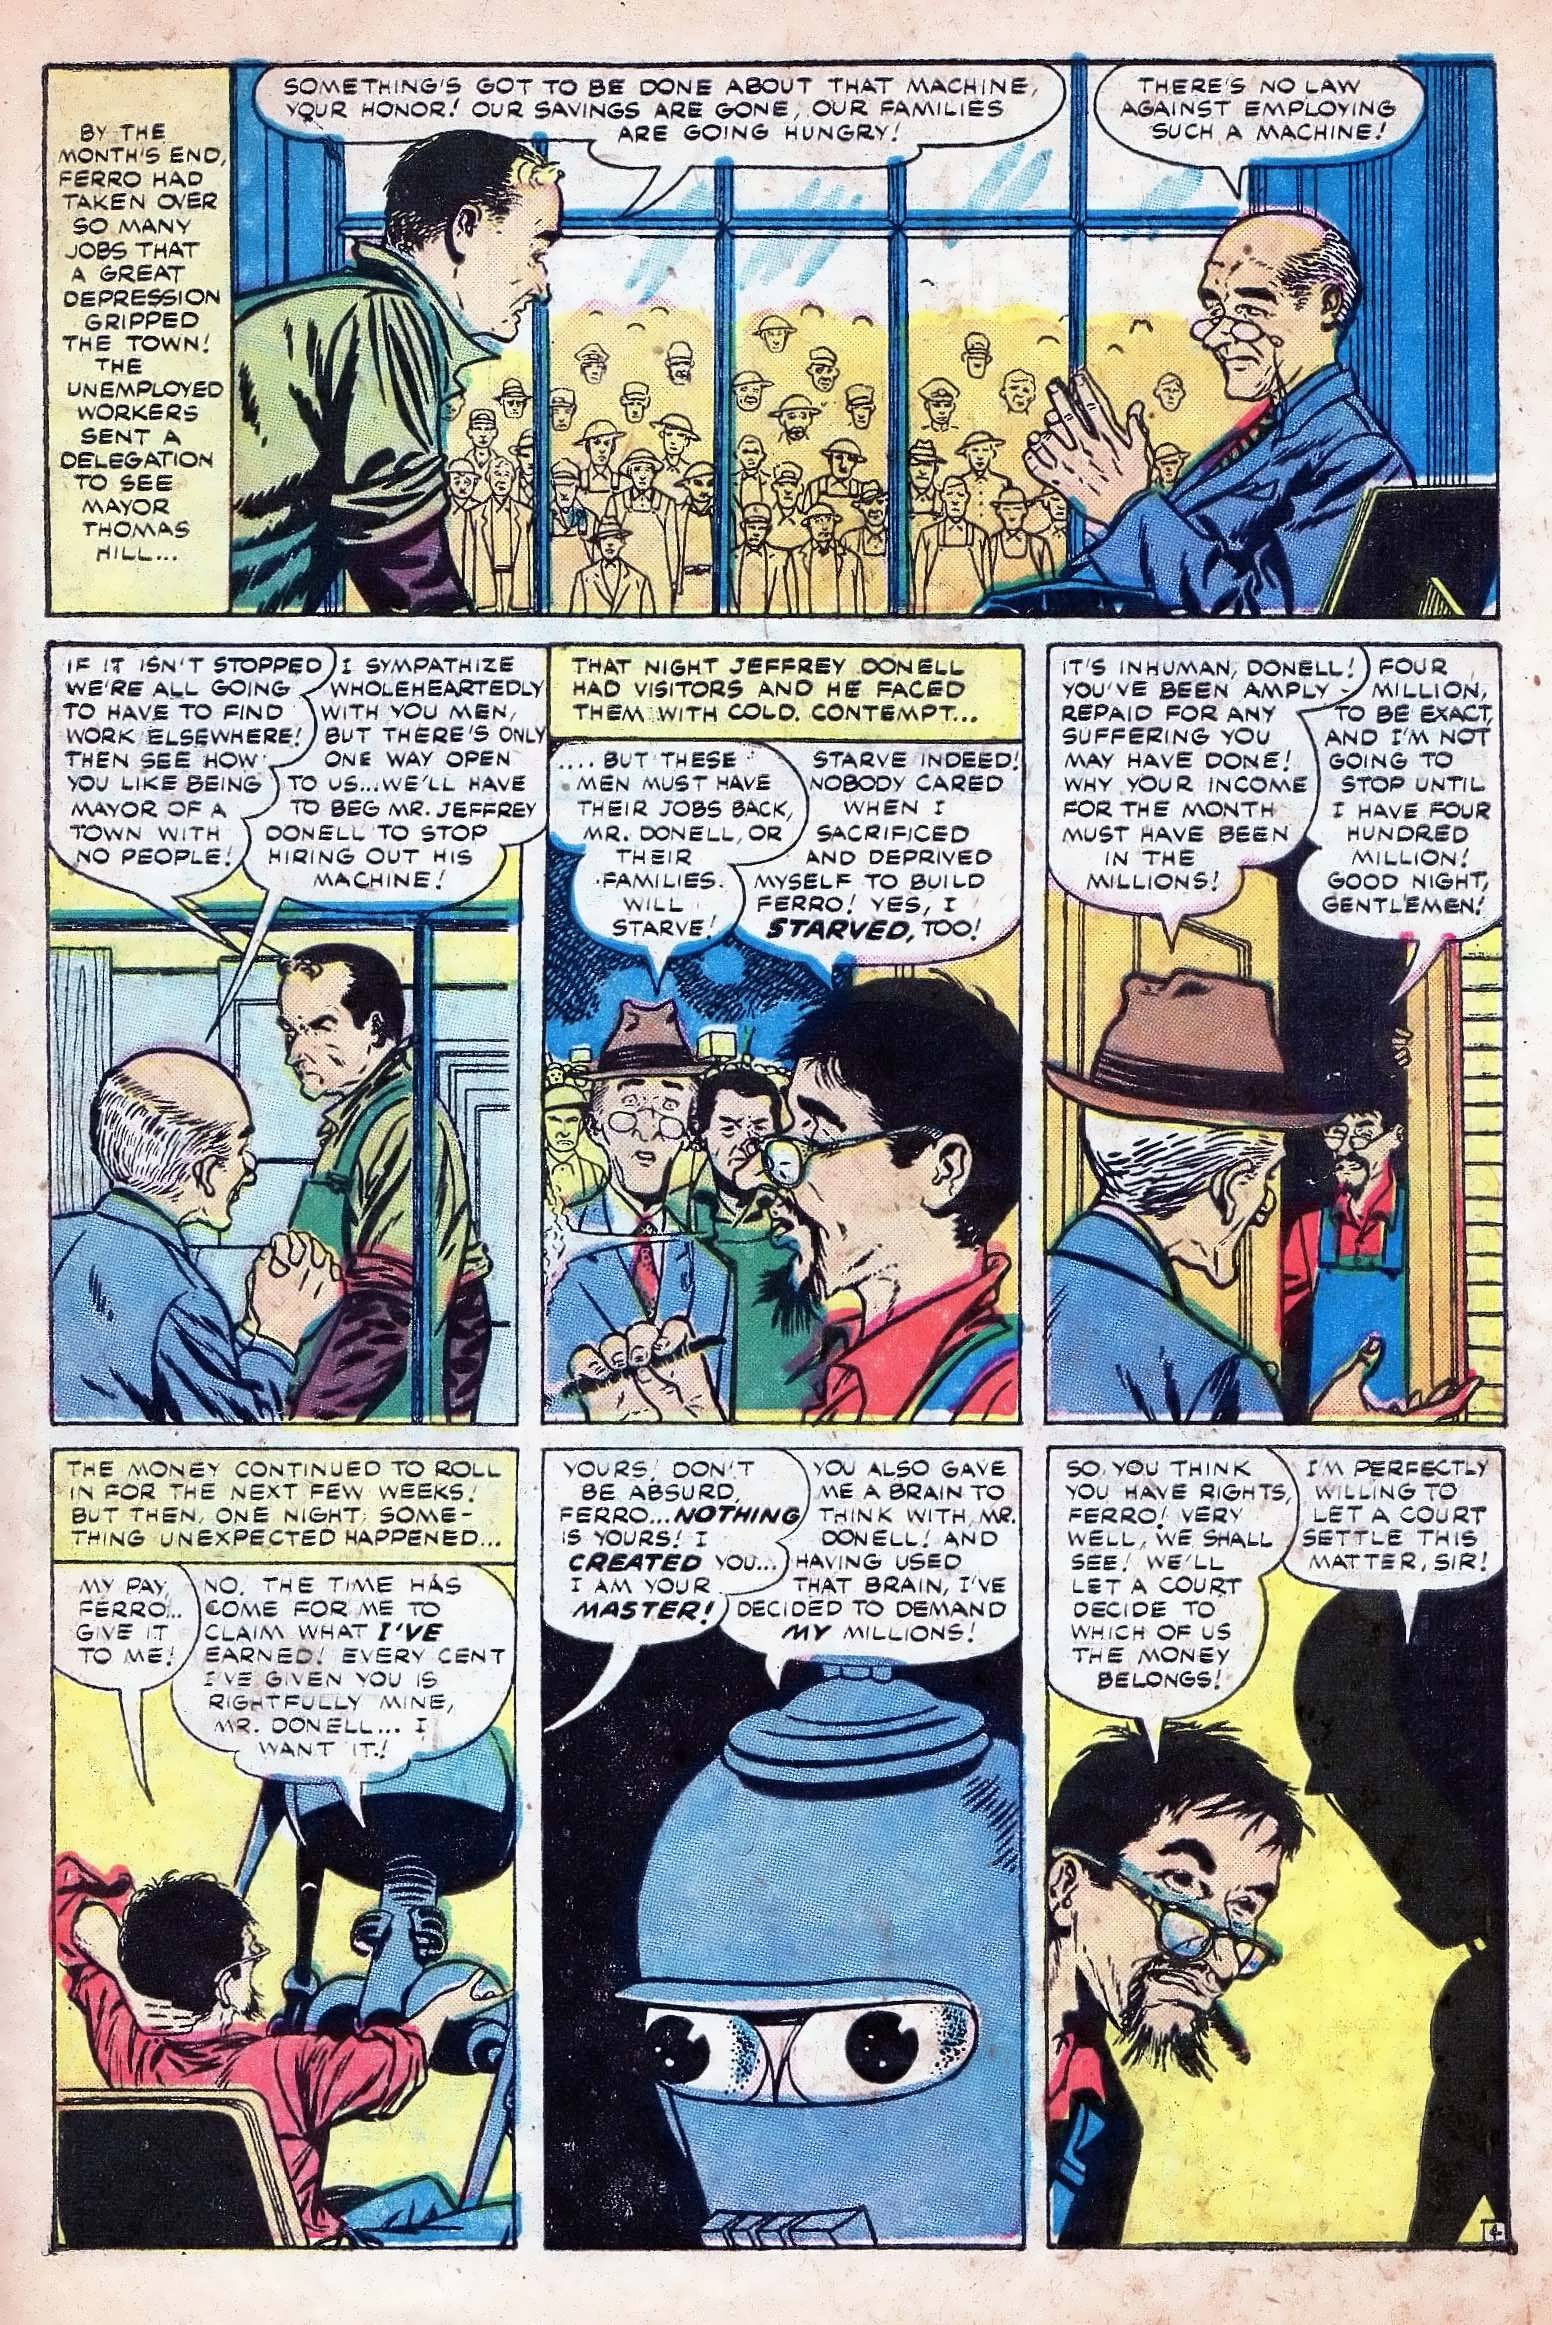 Marvel Tales (1949) 141 Page 30